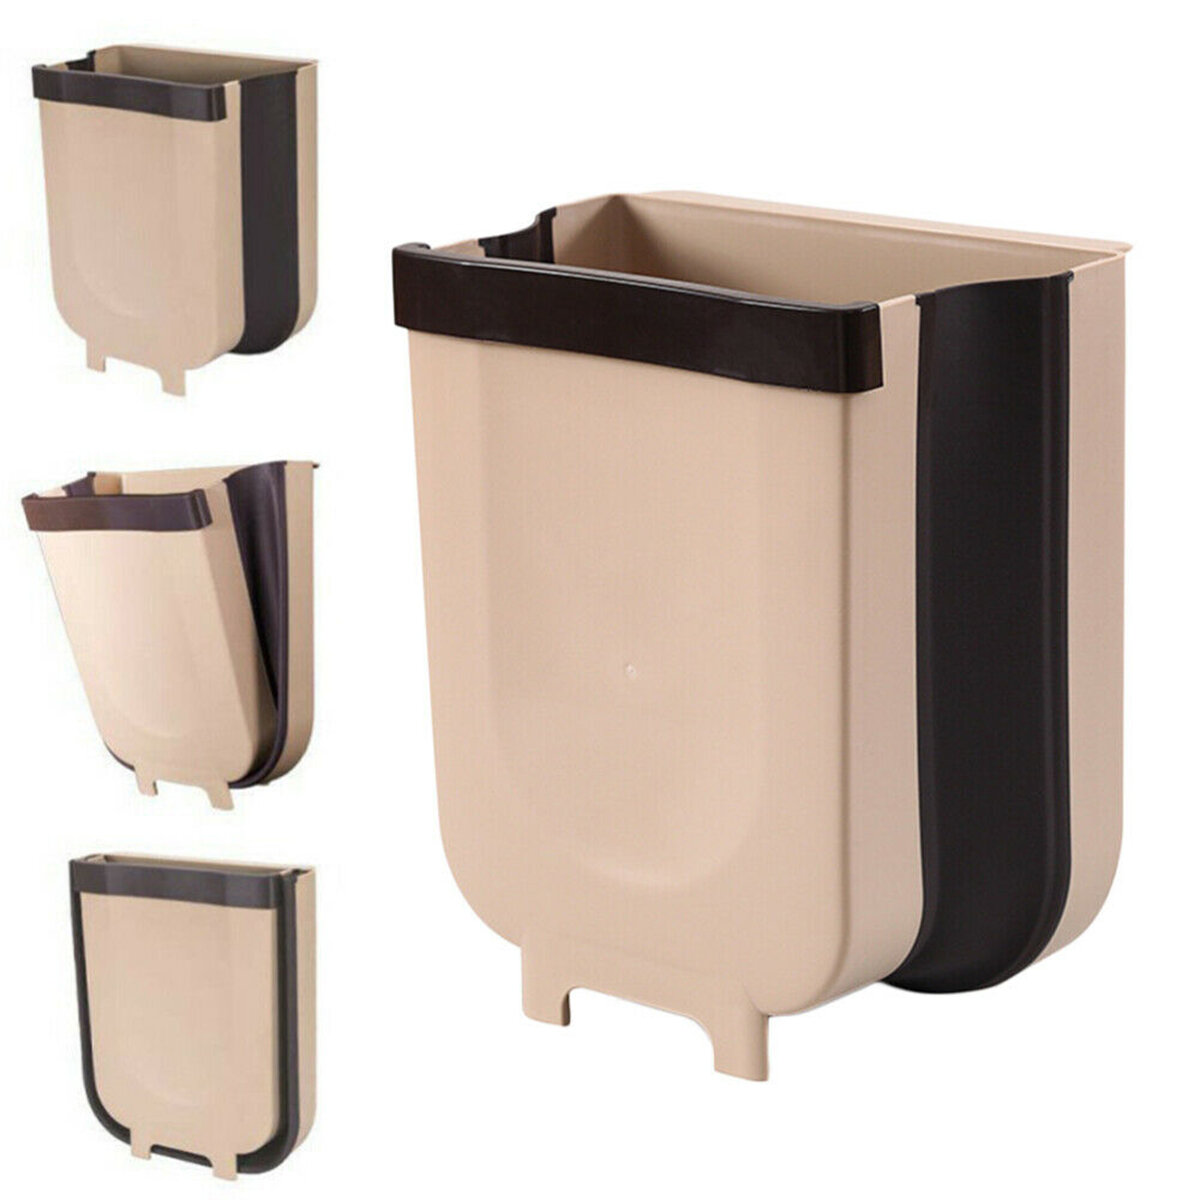 8L Foldable Kitchen Cabinet Door Hanging Trash Can Wall-mounted Waste Basket